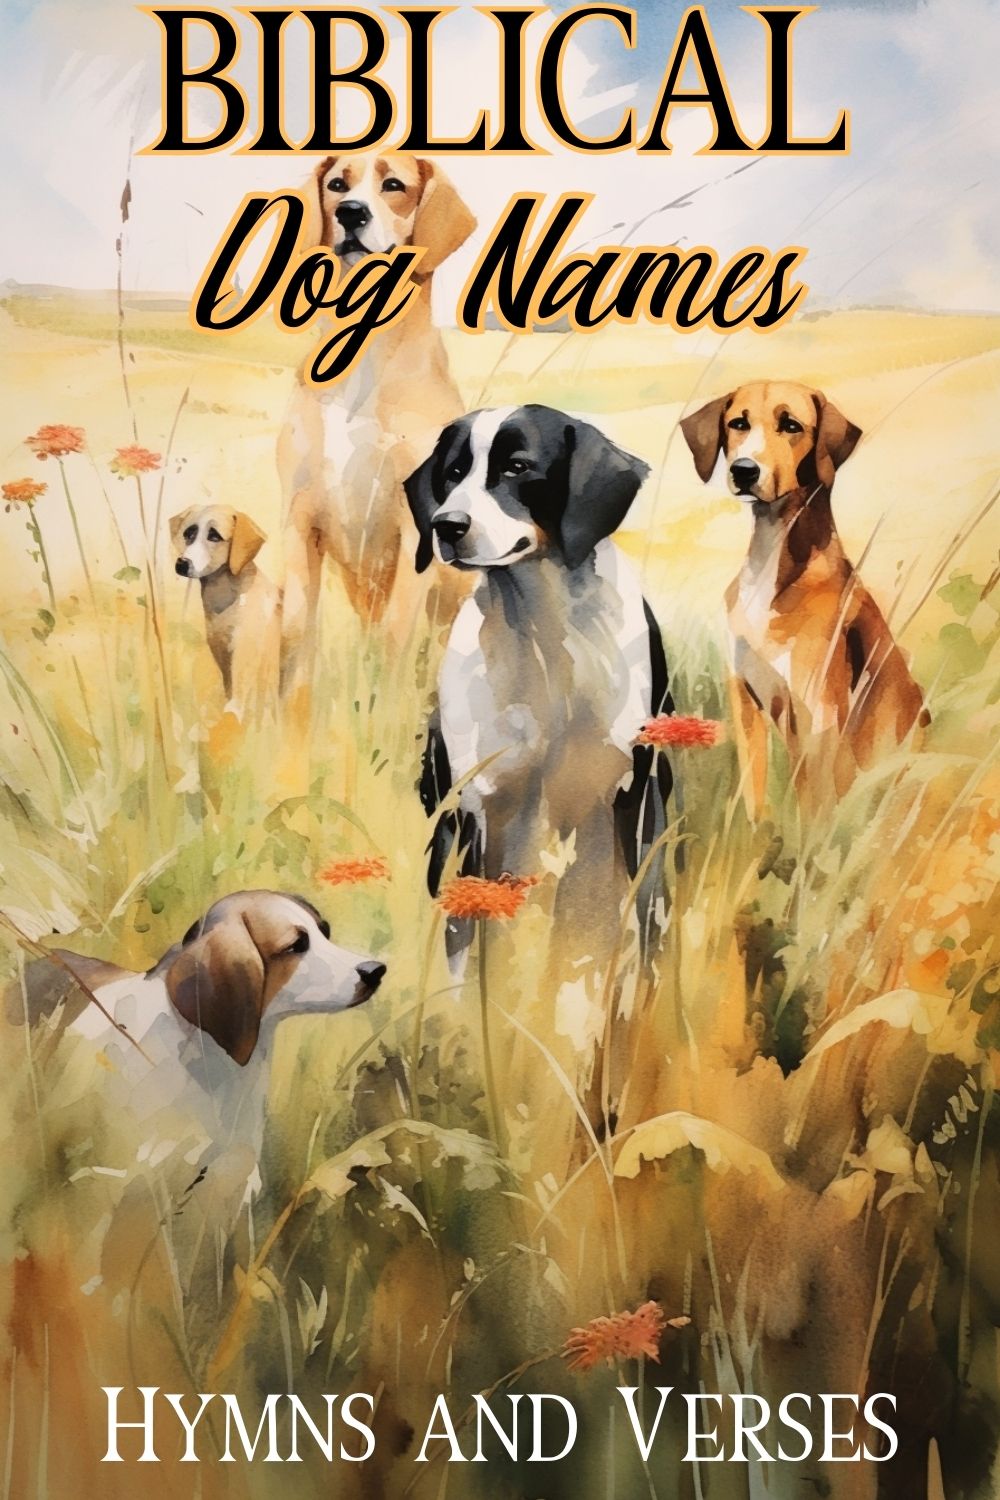 Pinterest pin about biblical dog names with dogs in a field